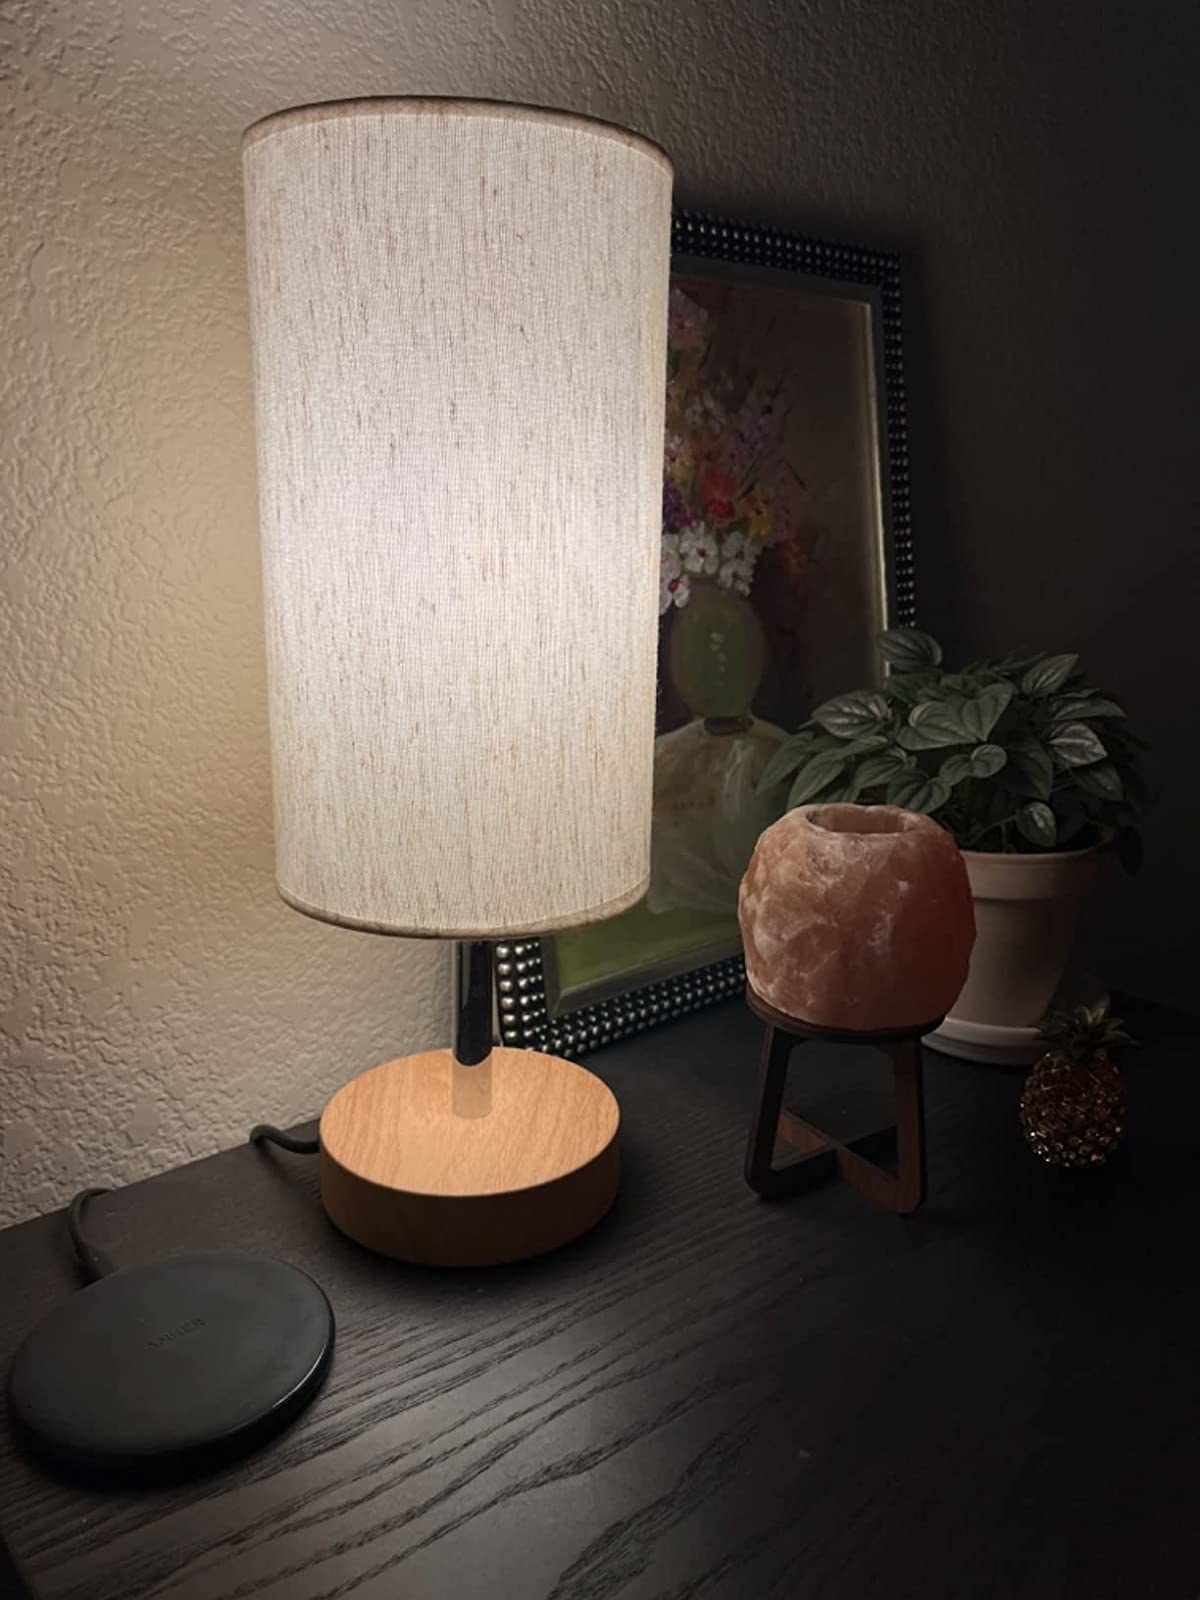 Reviewer image of lamp next to other decor